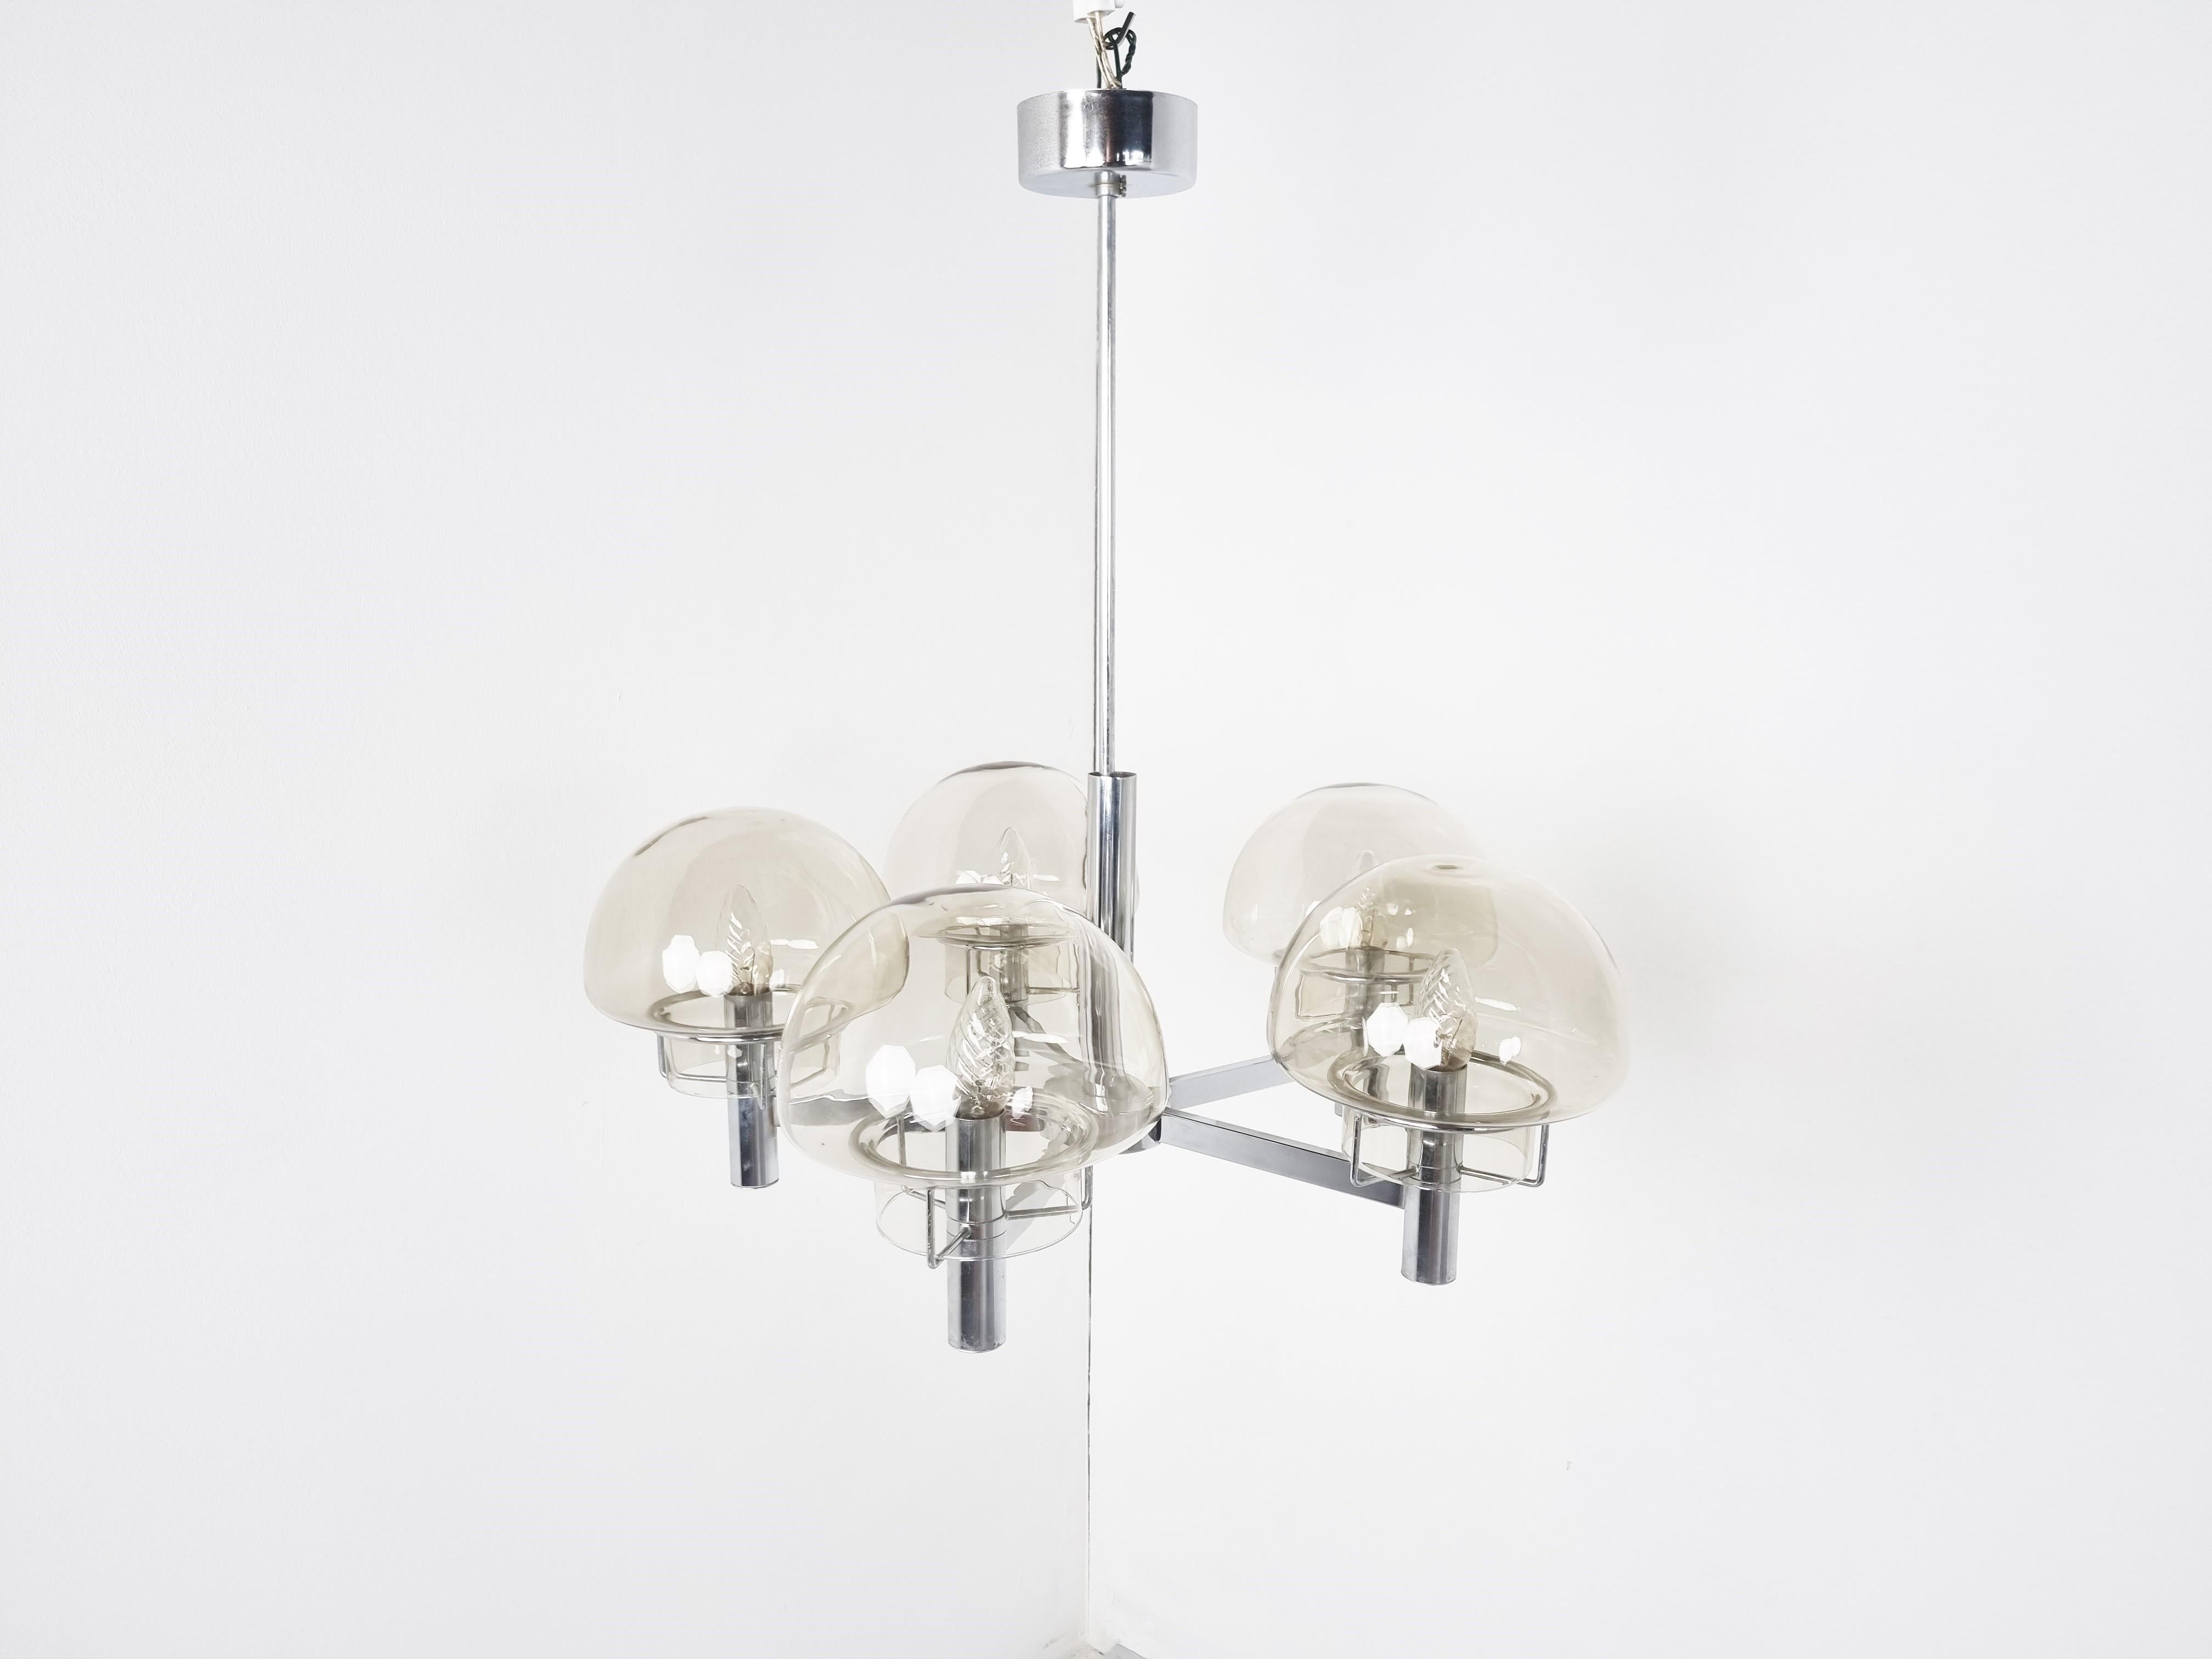 1970s Gaetano Sciolari style chandelier with a chrome frame and mushroom shaped smoked glass lamp shades.

The lamp emits a soft welcomming light.

Good condition

Tested and ready to use with E14 light bulbs

1970s - Italy

Dimension:
Height: